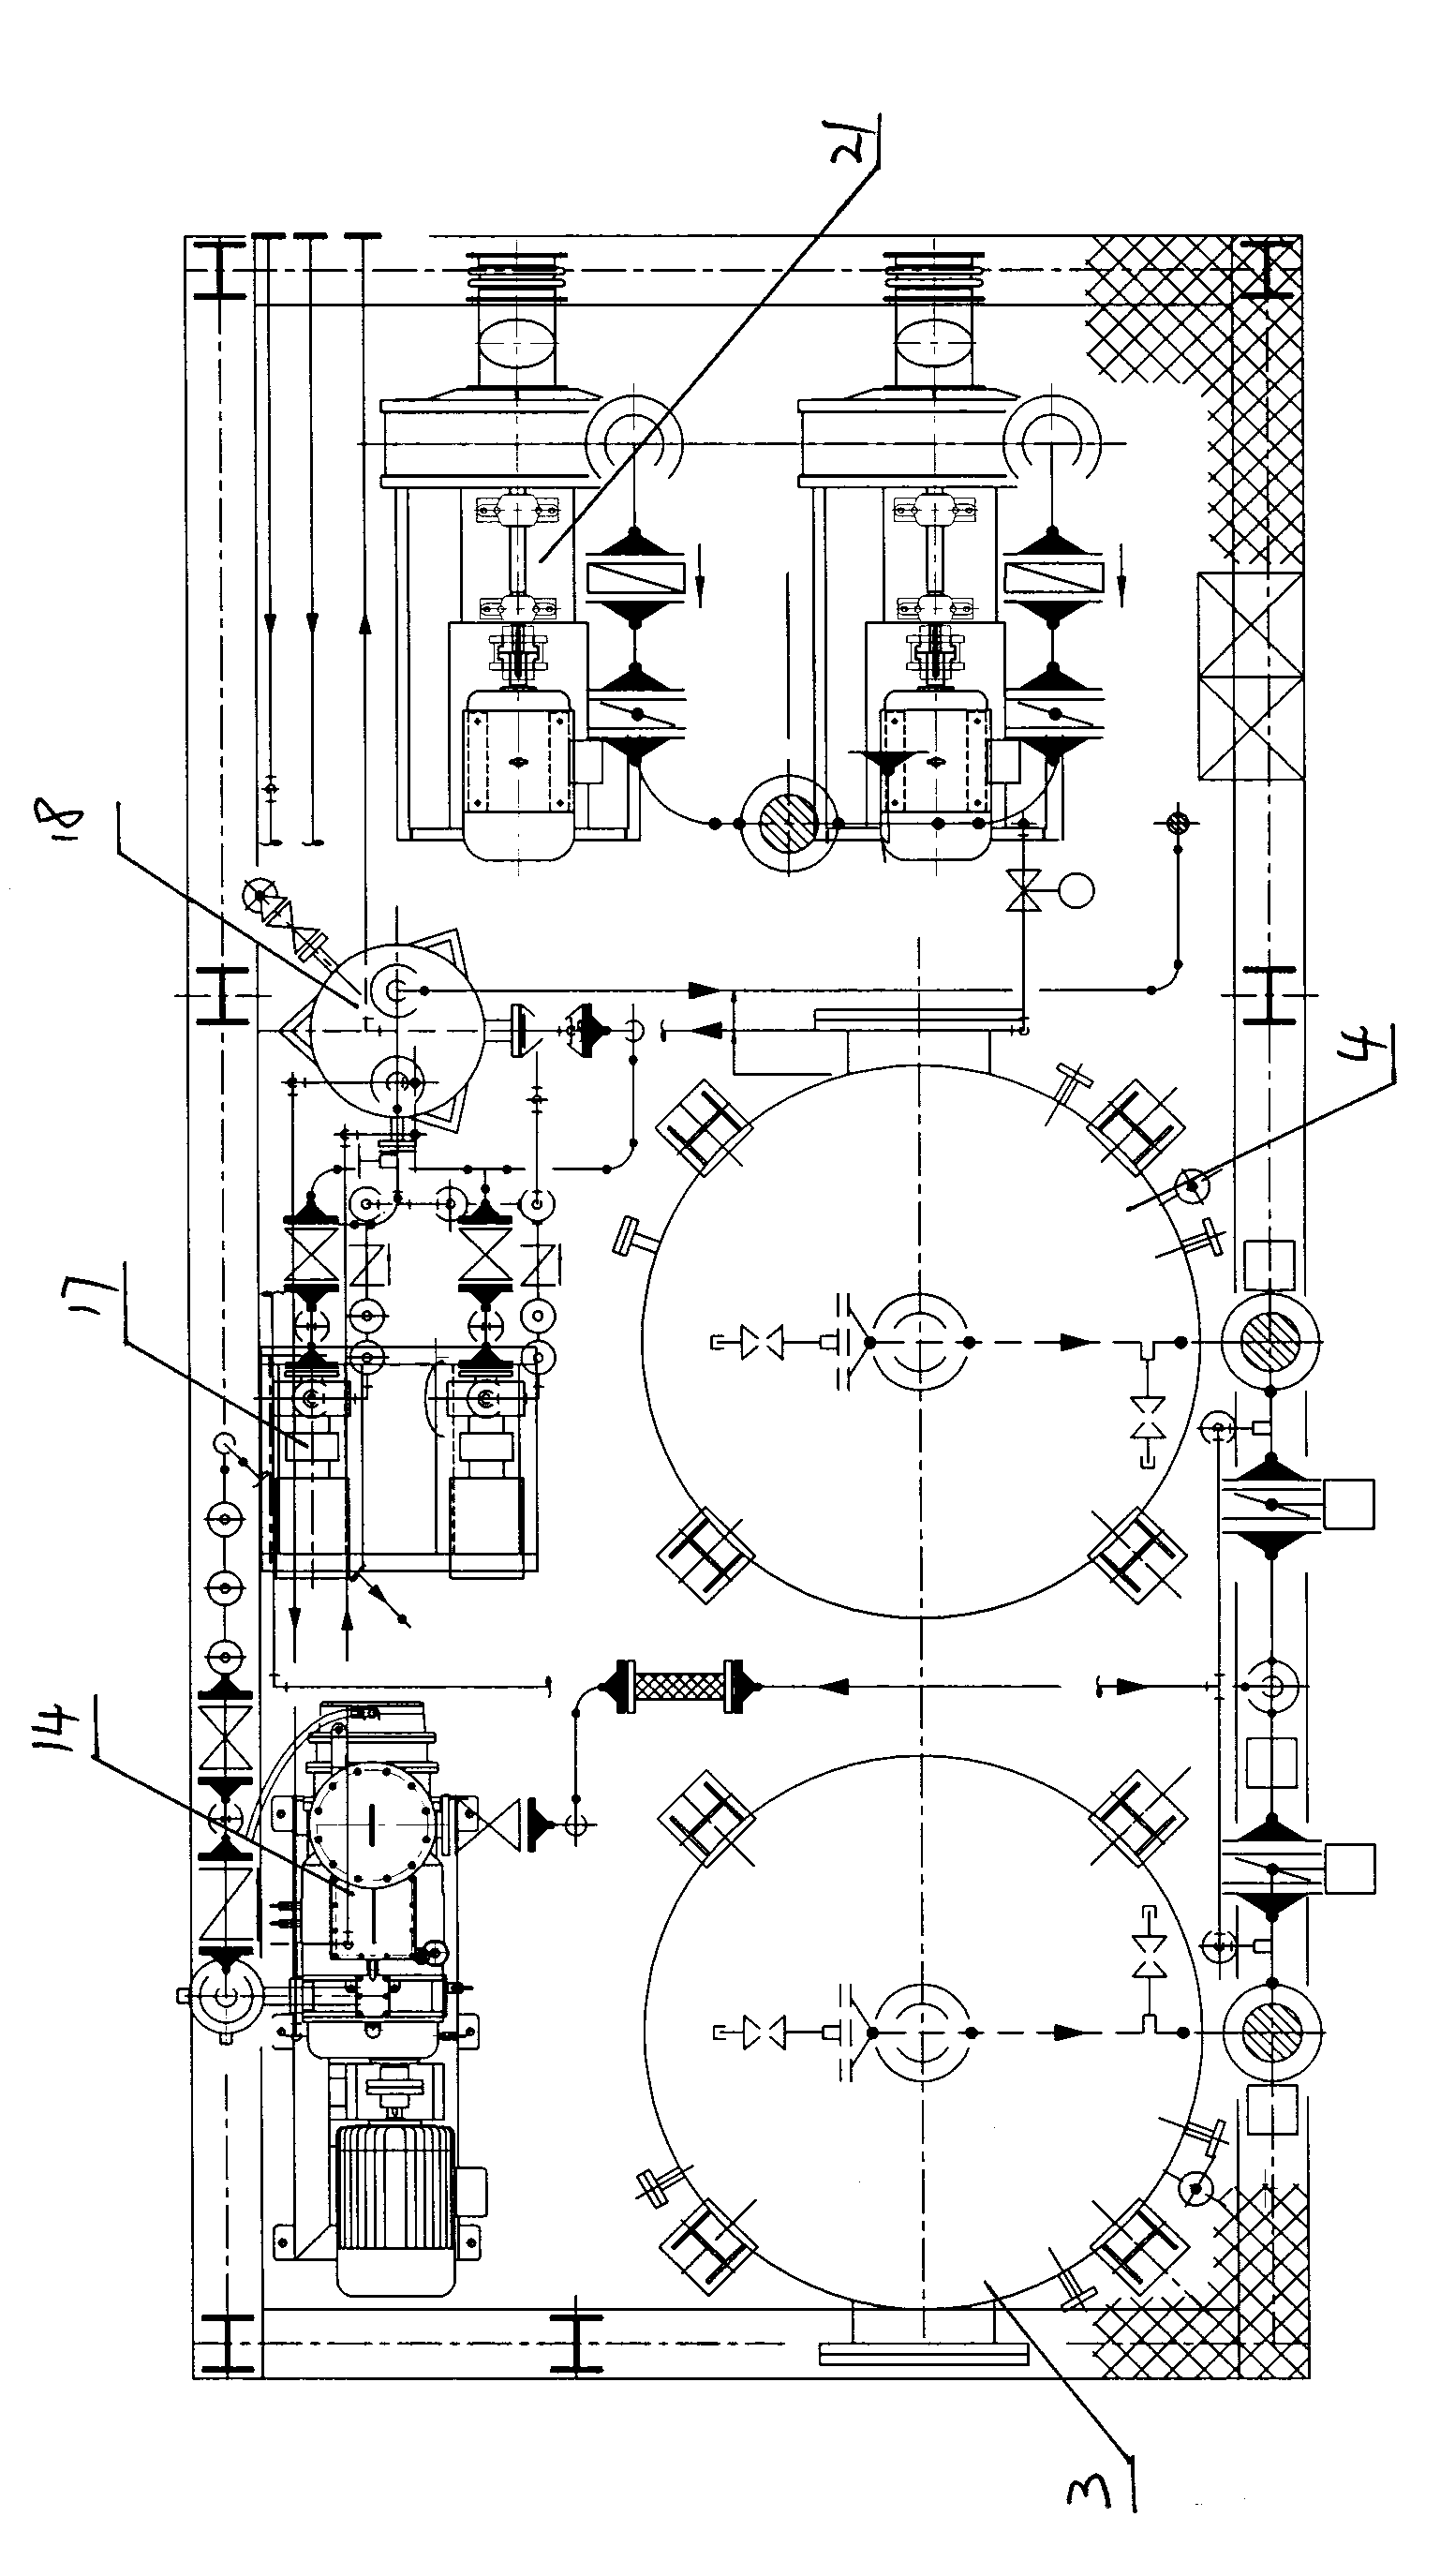 Integrated exhaust gas recovery device